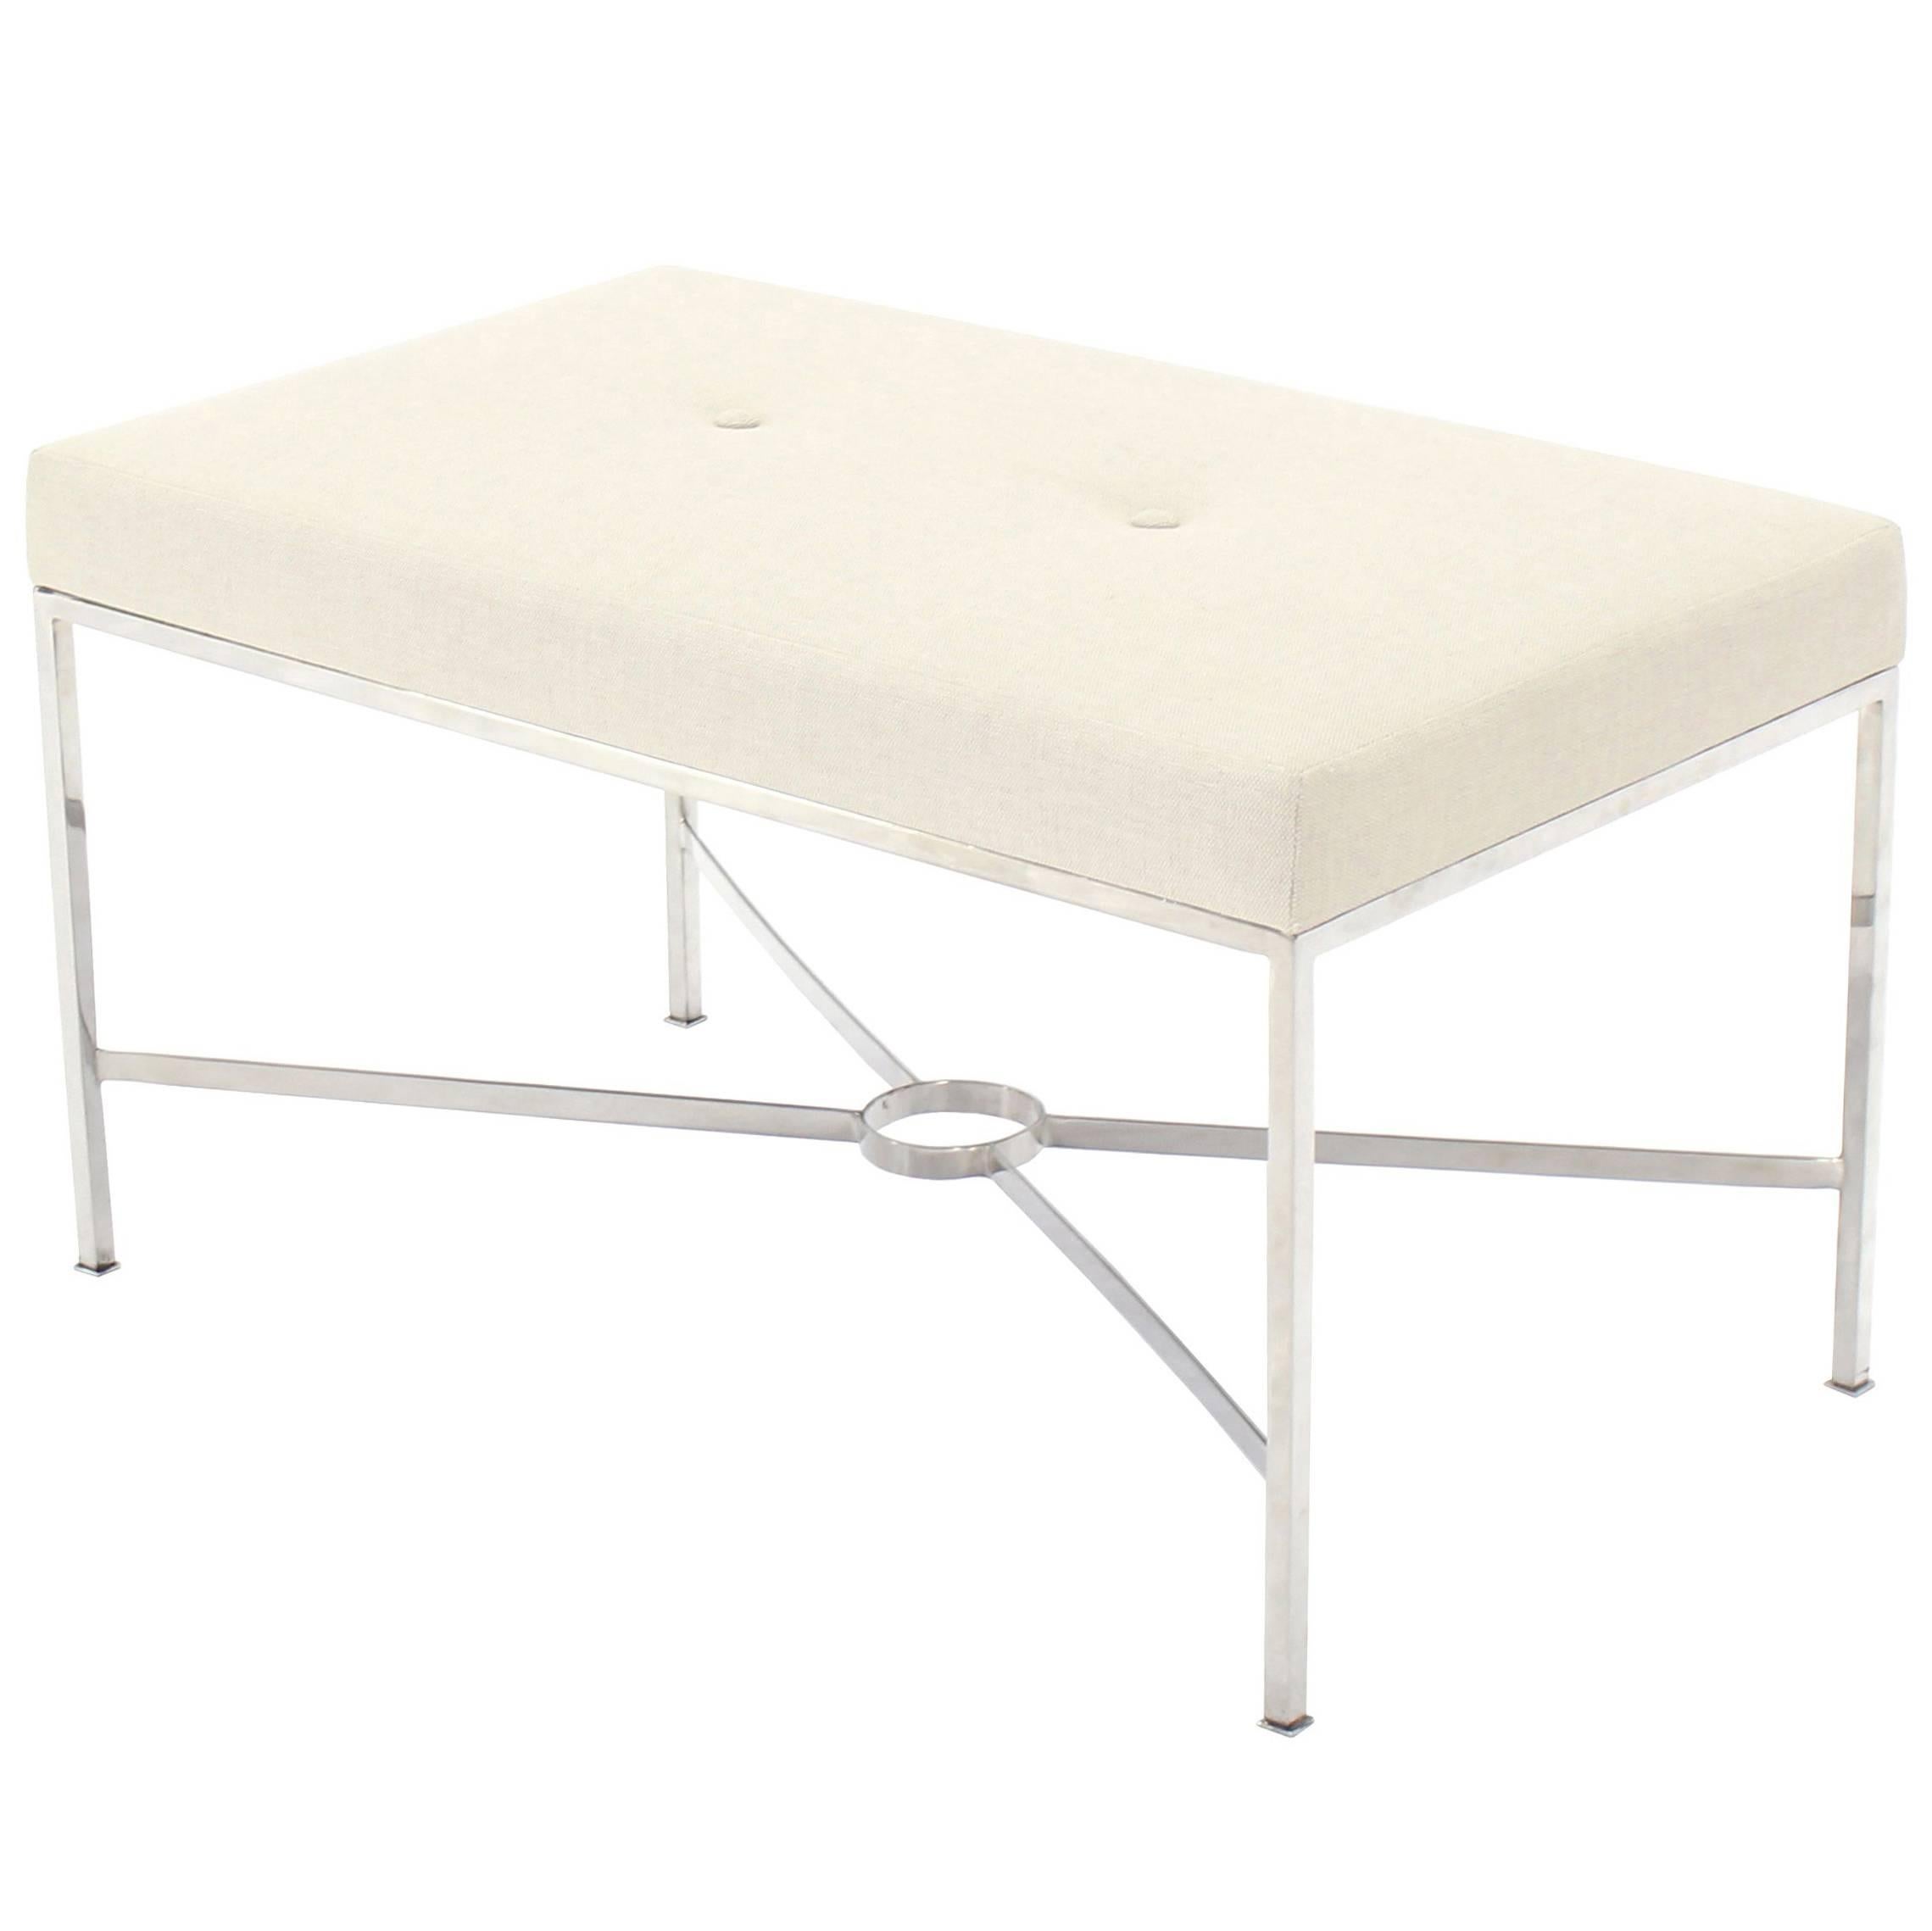 Chrome X-Base Upholstered Top Bench For Sale